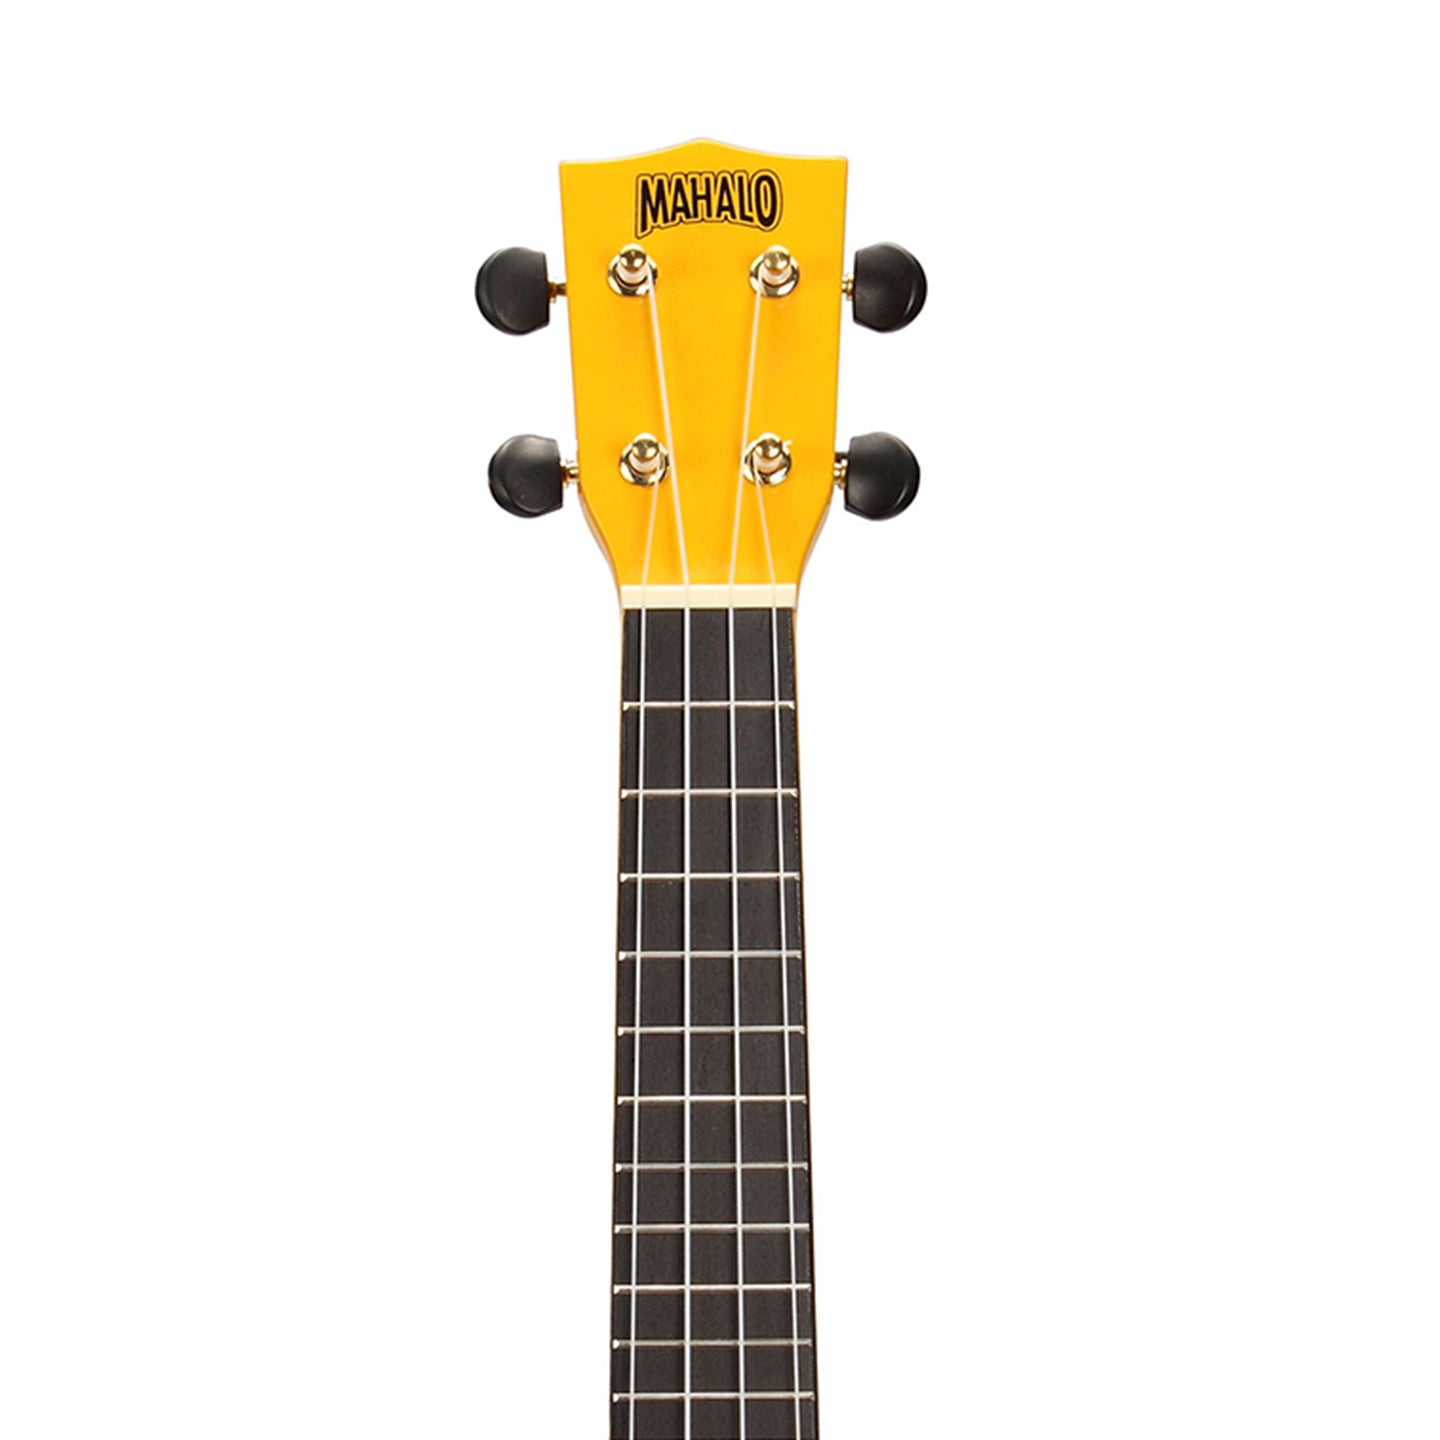 Mahalo U-Smile Series Acoustic Soprano Ukulele with 12 Frets, Built-in LCD tuner, High Gloss Finish VTYW Smiley Face (Yellow)